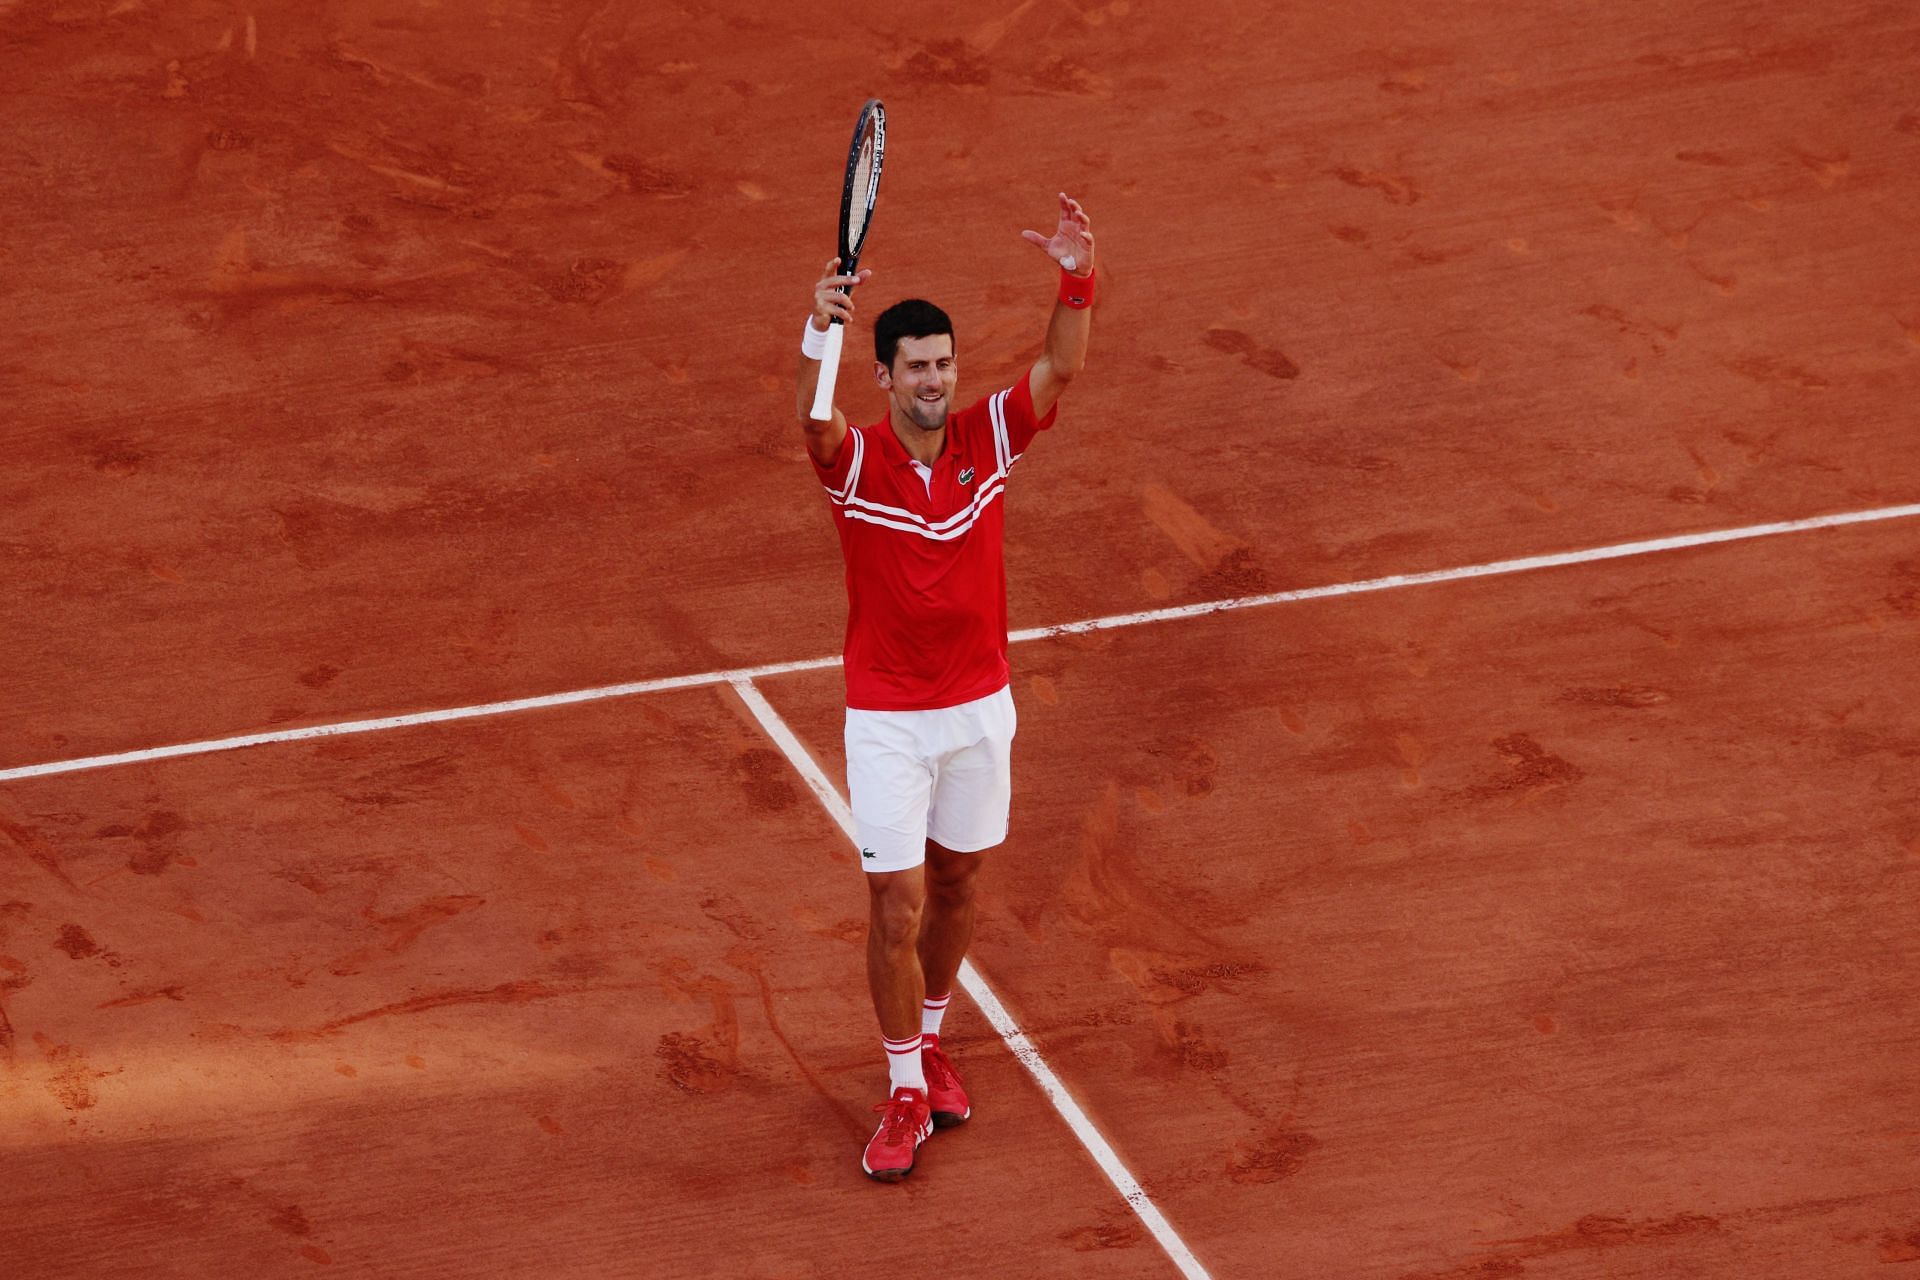 The Serb celebrates after winning the 2021 French Open.